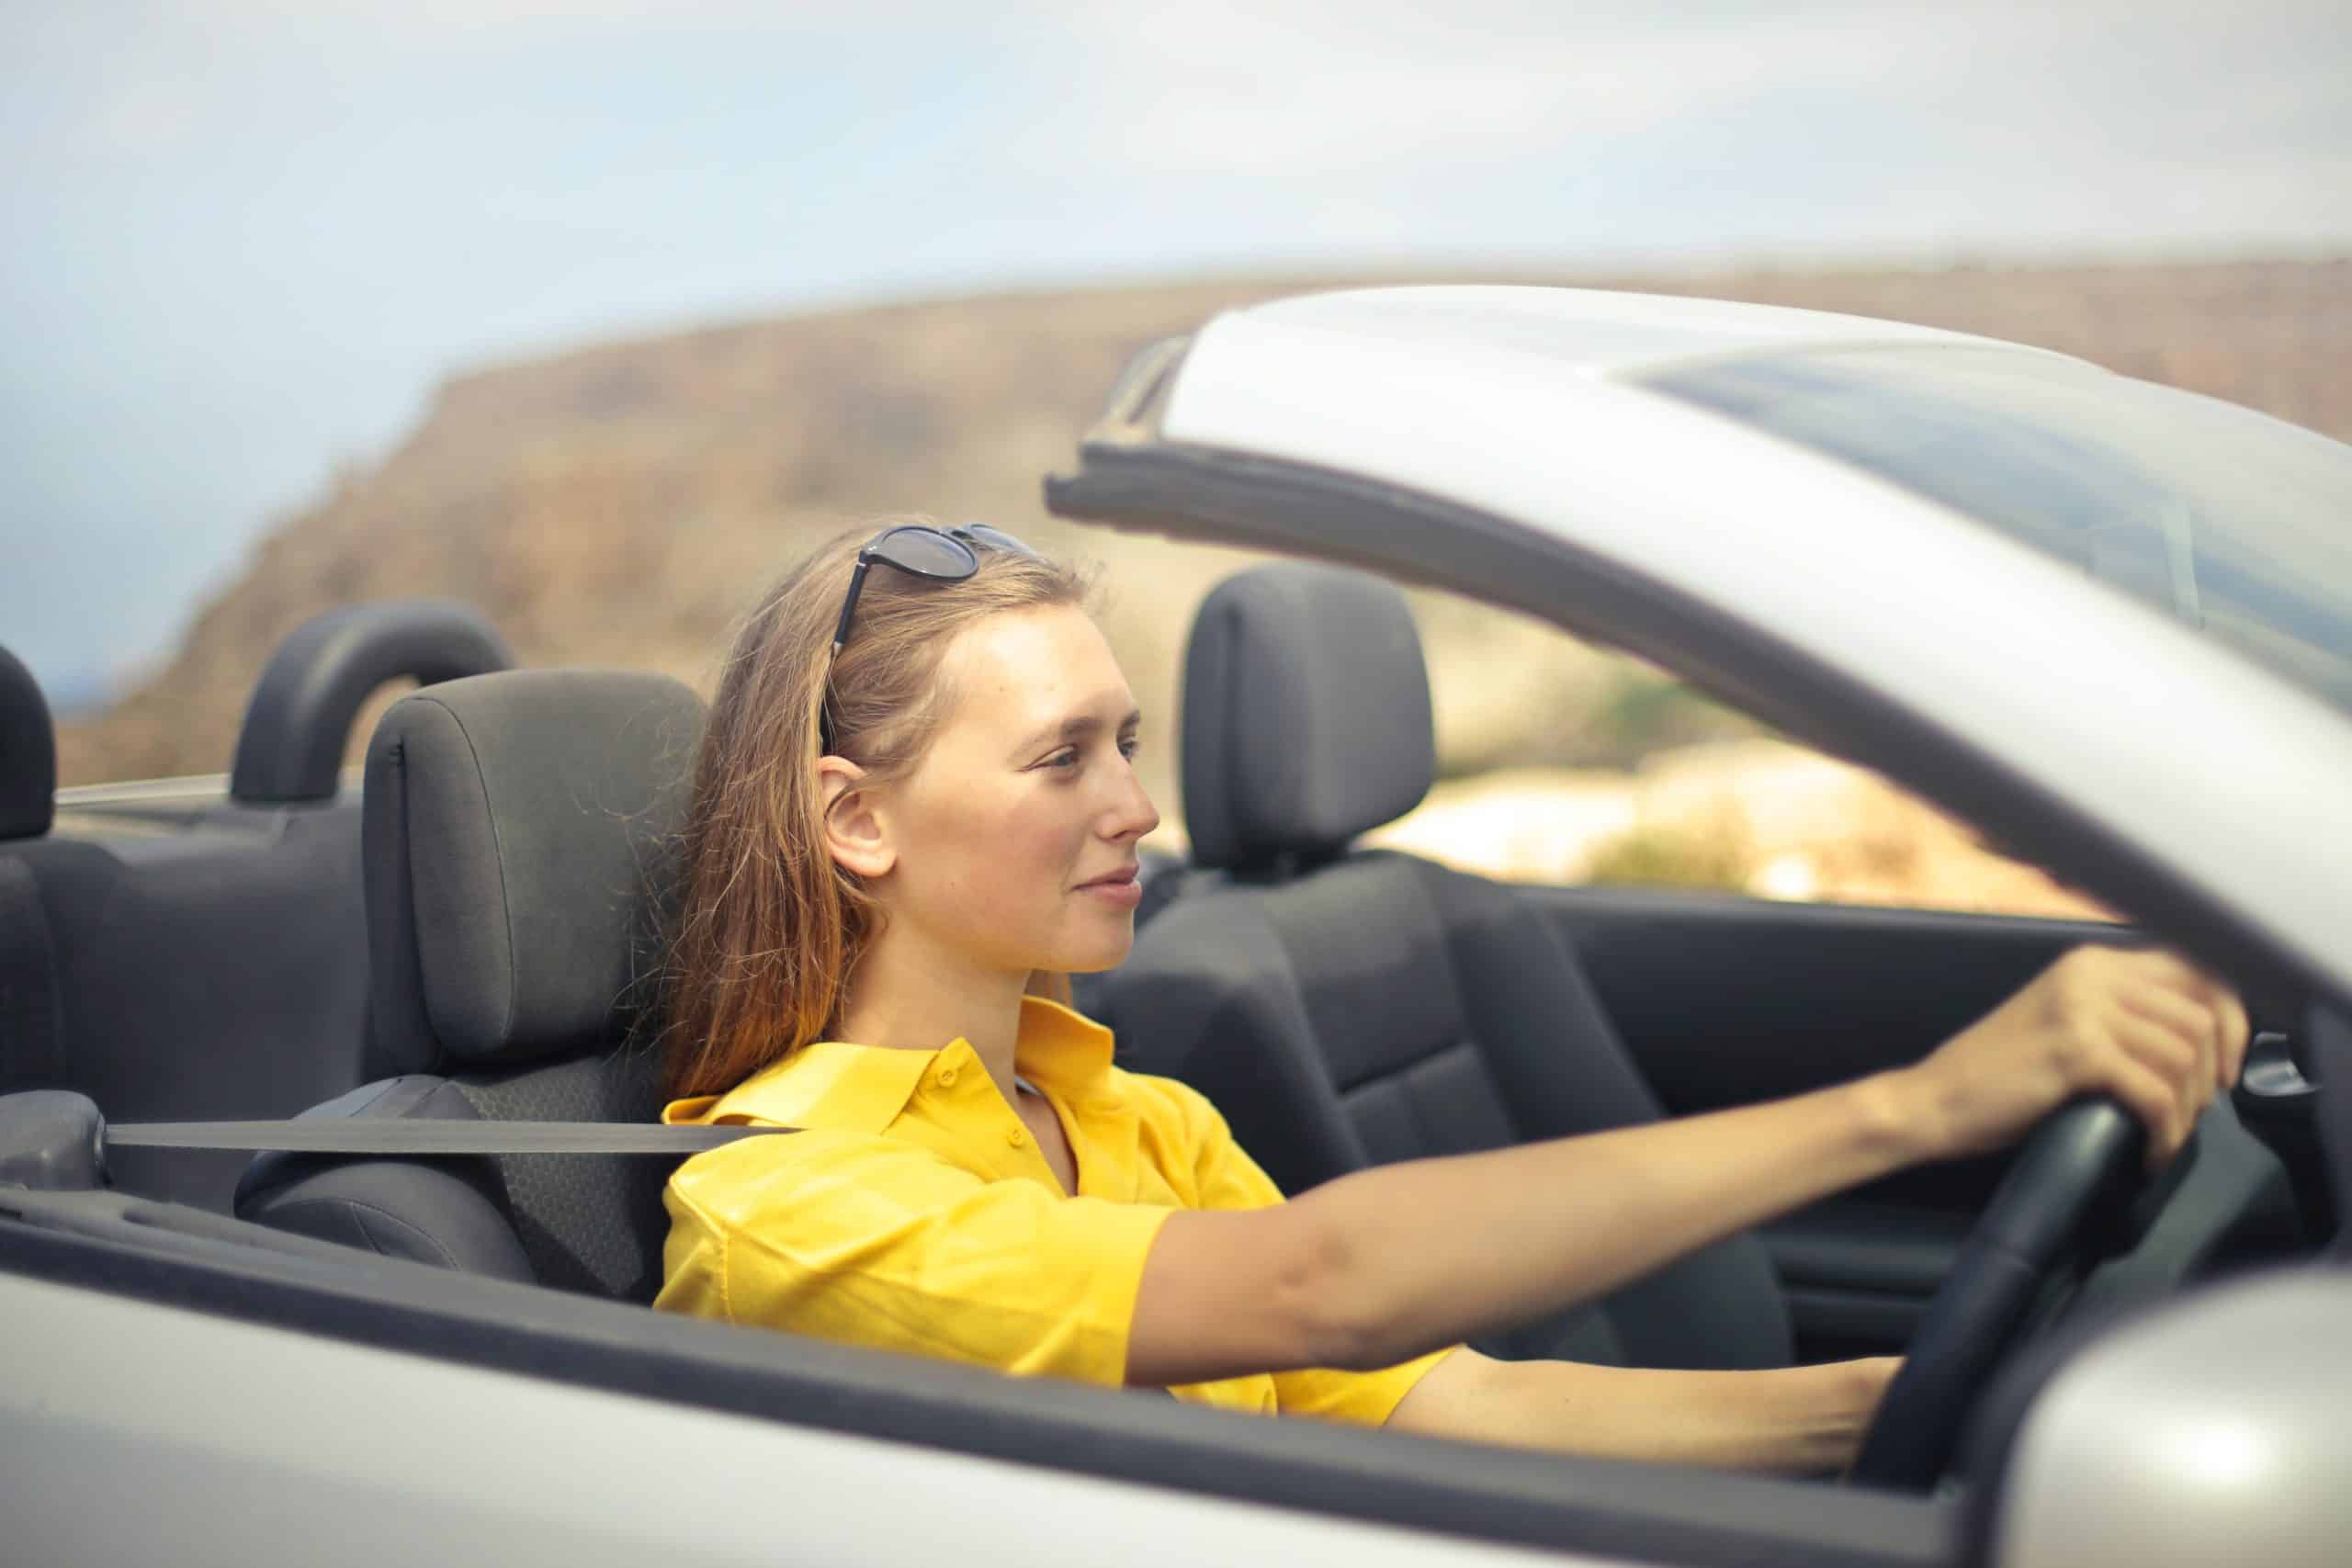 This female driver in a yellow top considers tips to prepare for her driving test in Australia.